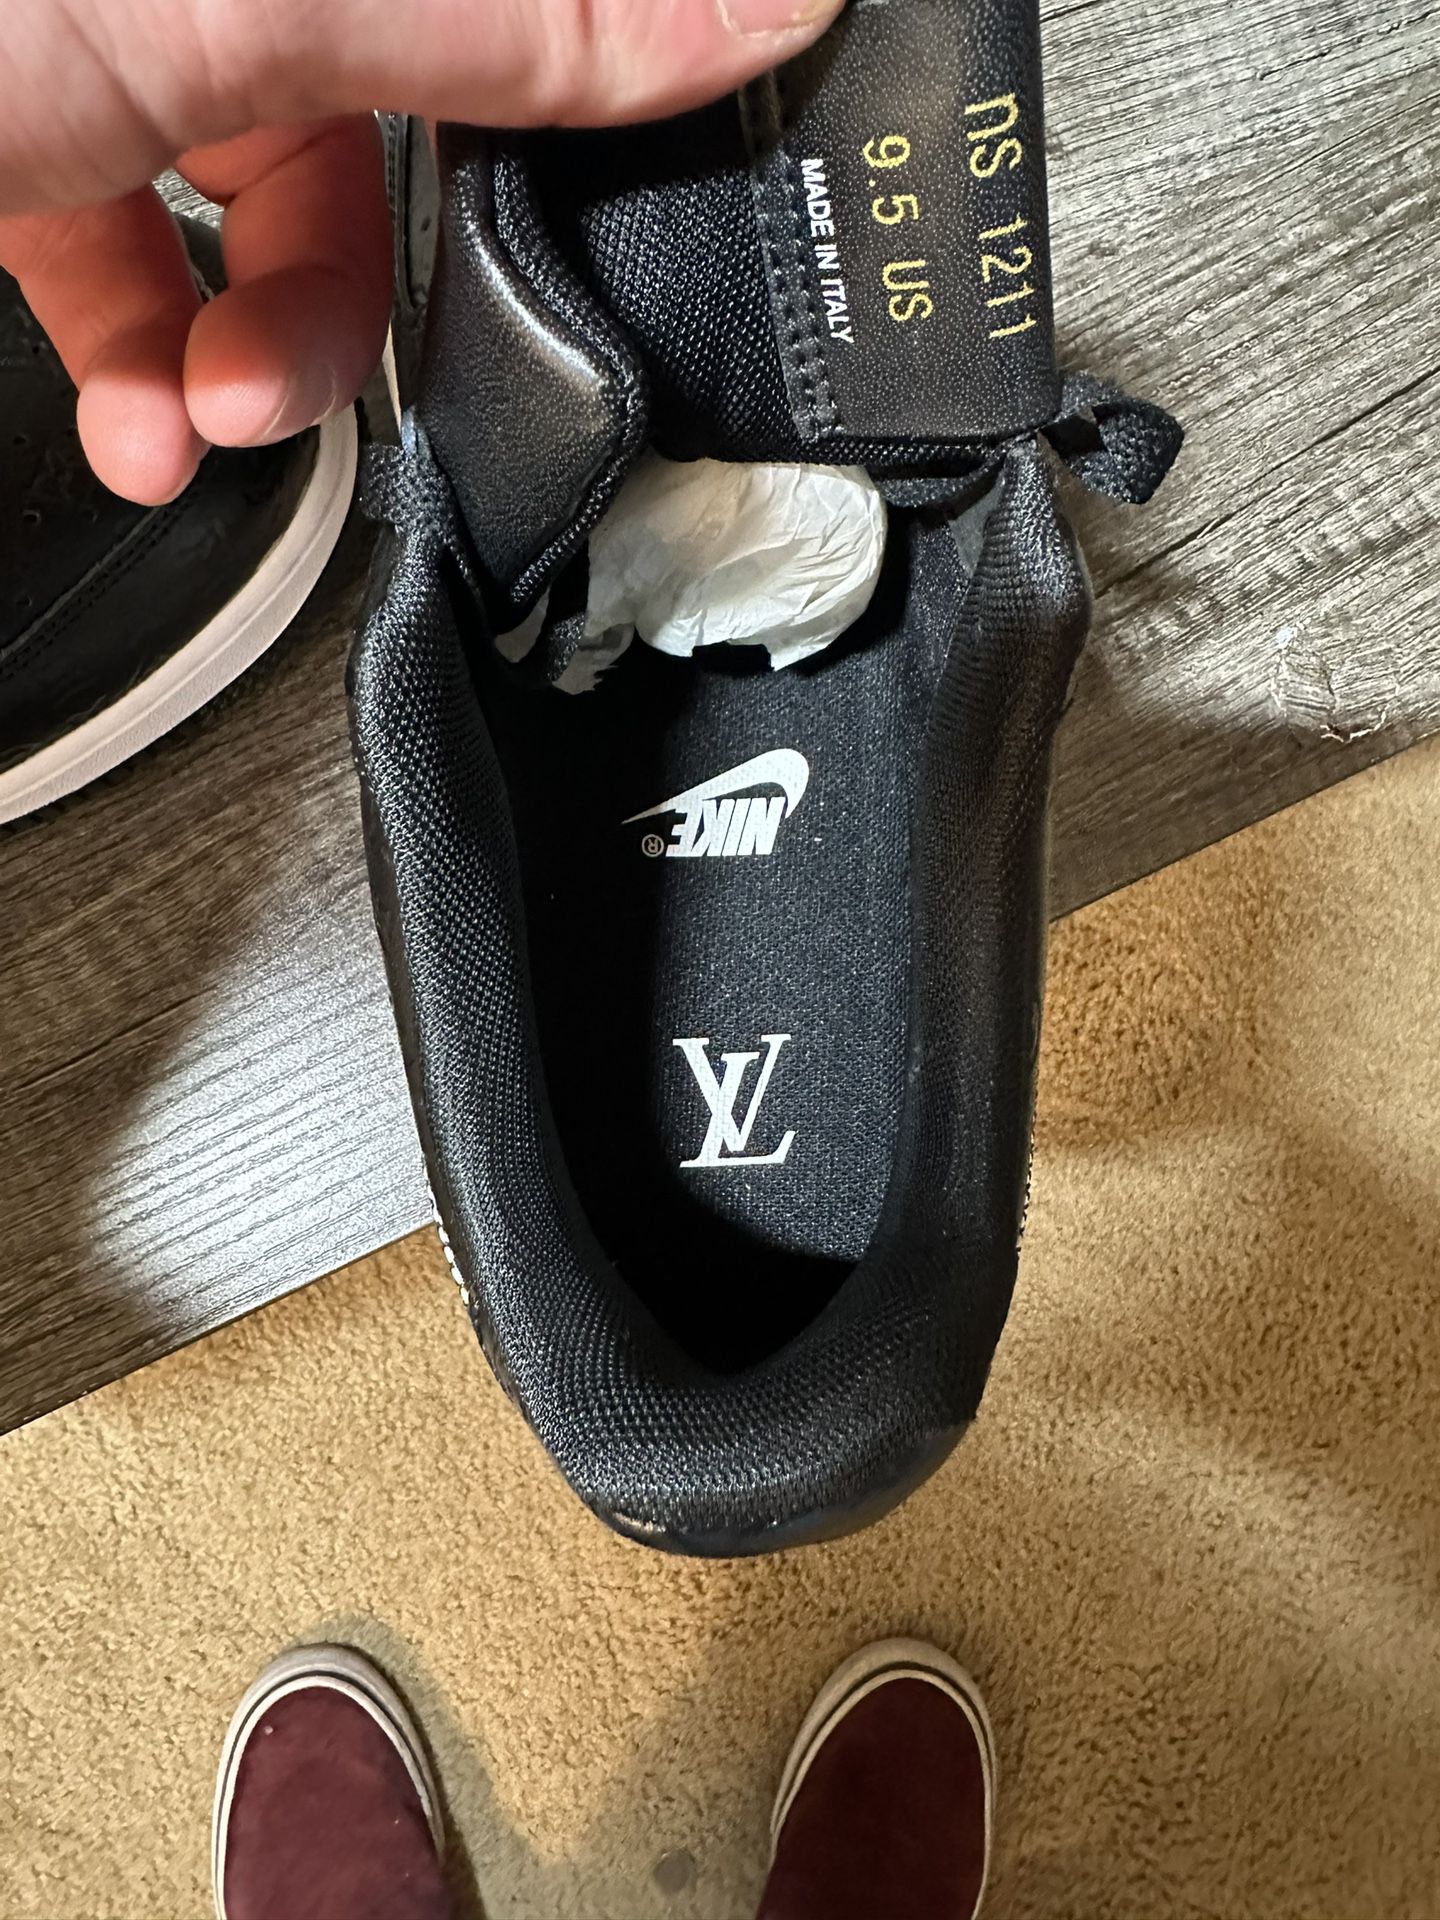 Custom Louis Vuitton Nike Air Force 1 for Sale in San Leandro, CA - OfferUp